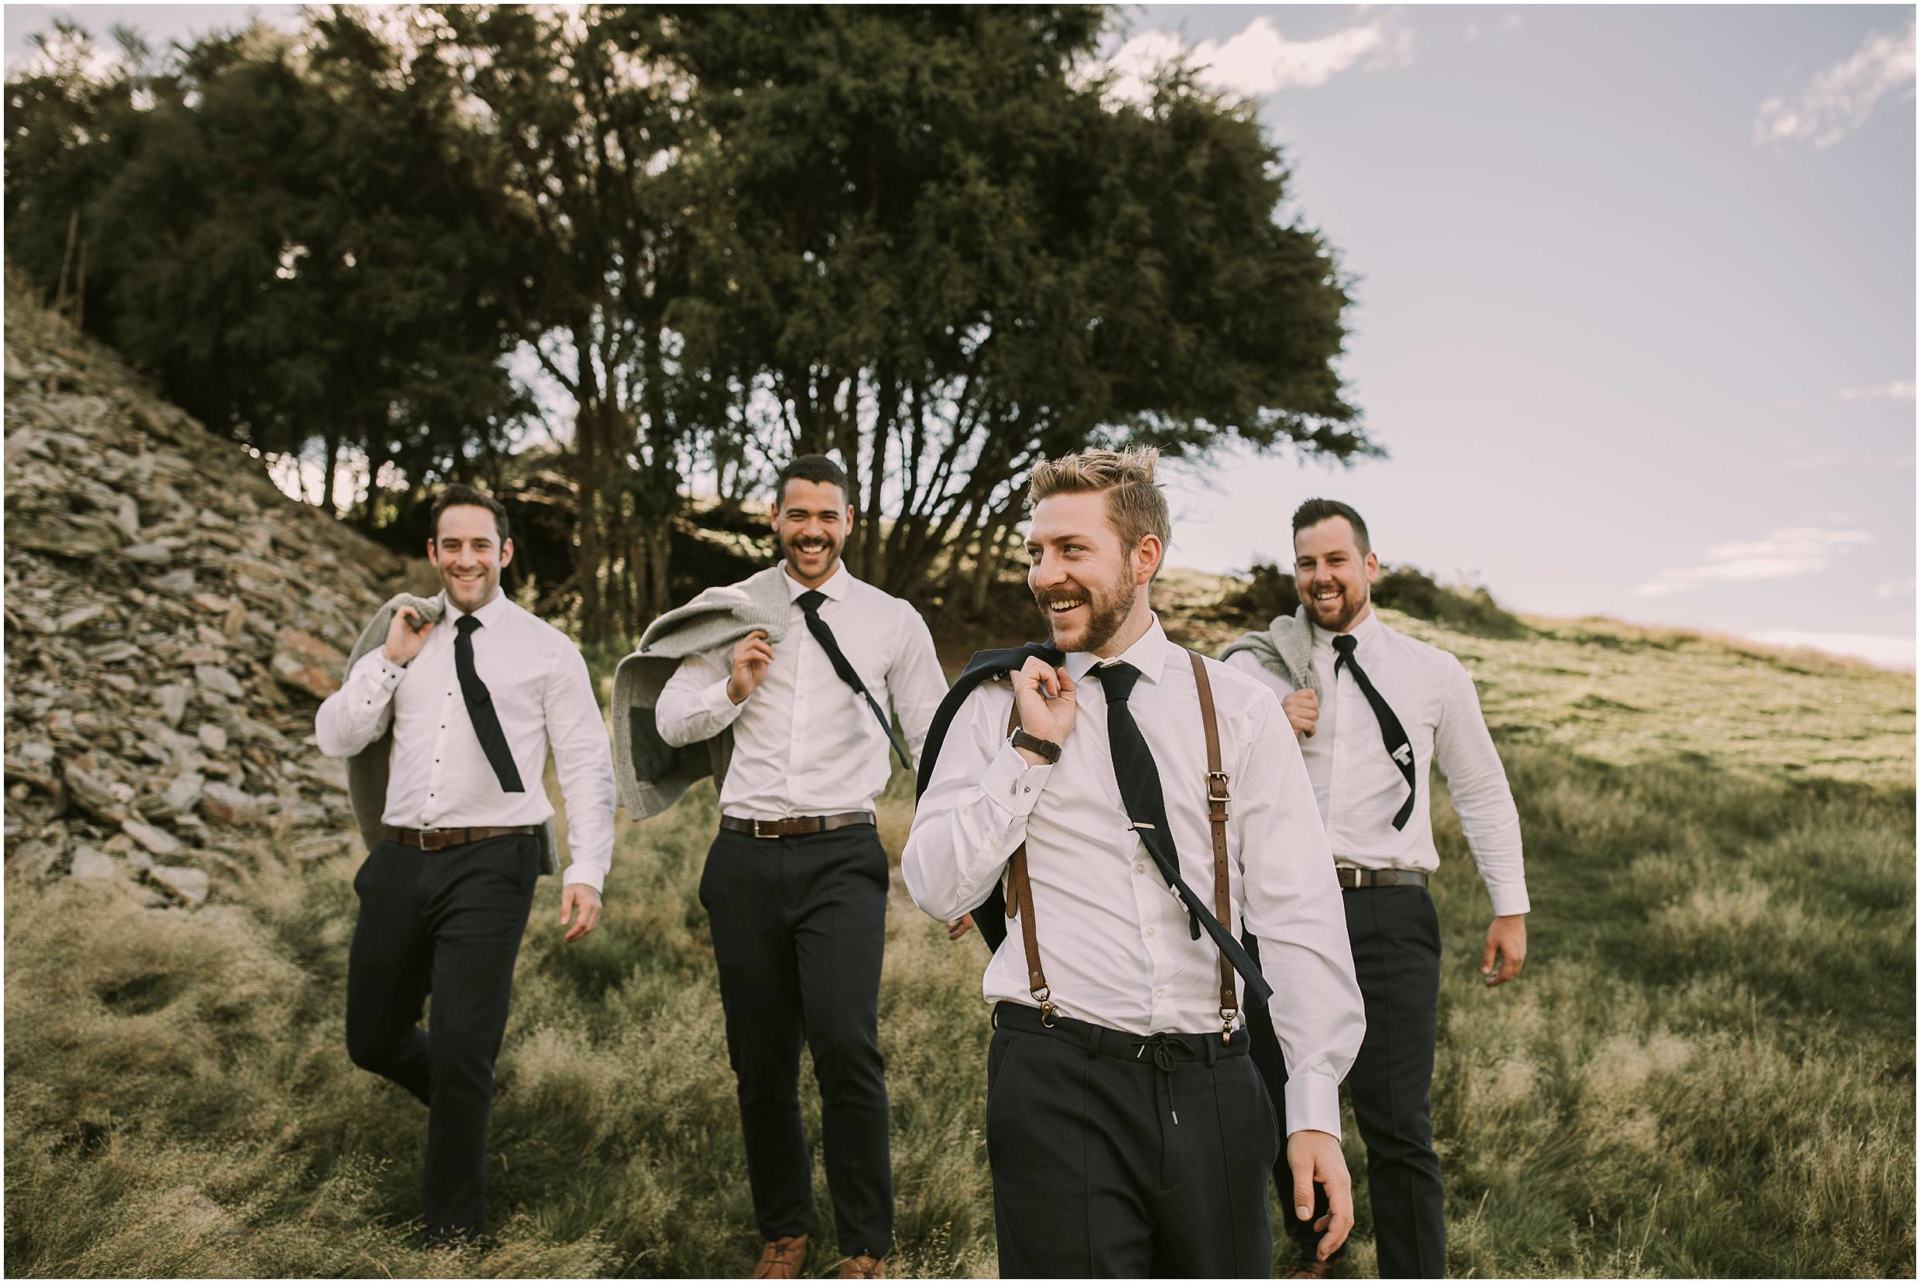 Charlotte Kiri Photography - Wedding Photography of a smart groom and groomsmen, smiling and wearing black pants with black tie and braces, and their jackets over their shoulders, whilst walking in the long grass near Criffel Station, Wanaka, New Zealand.